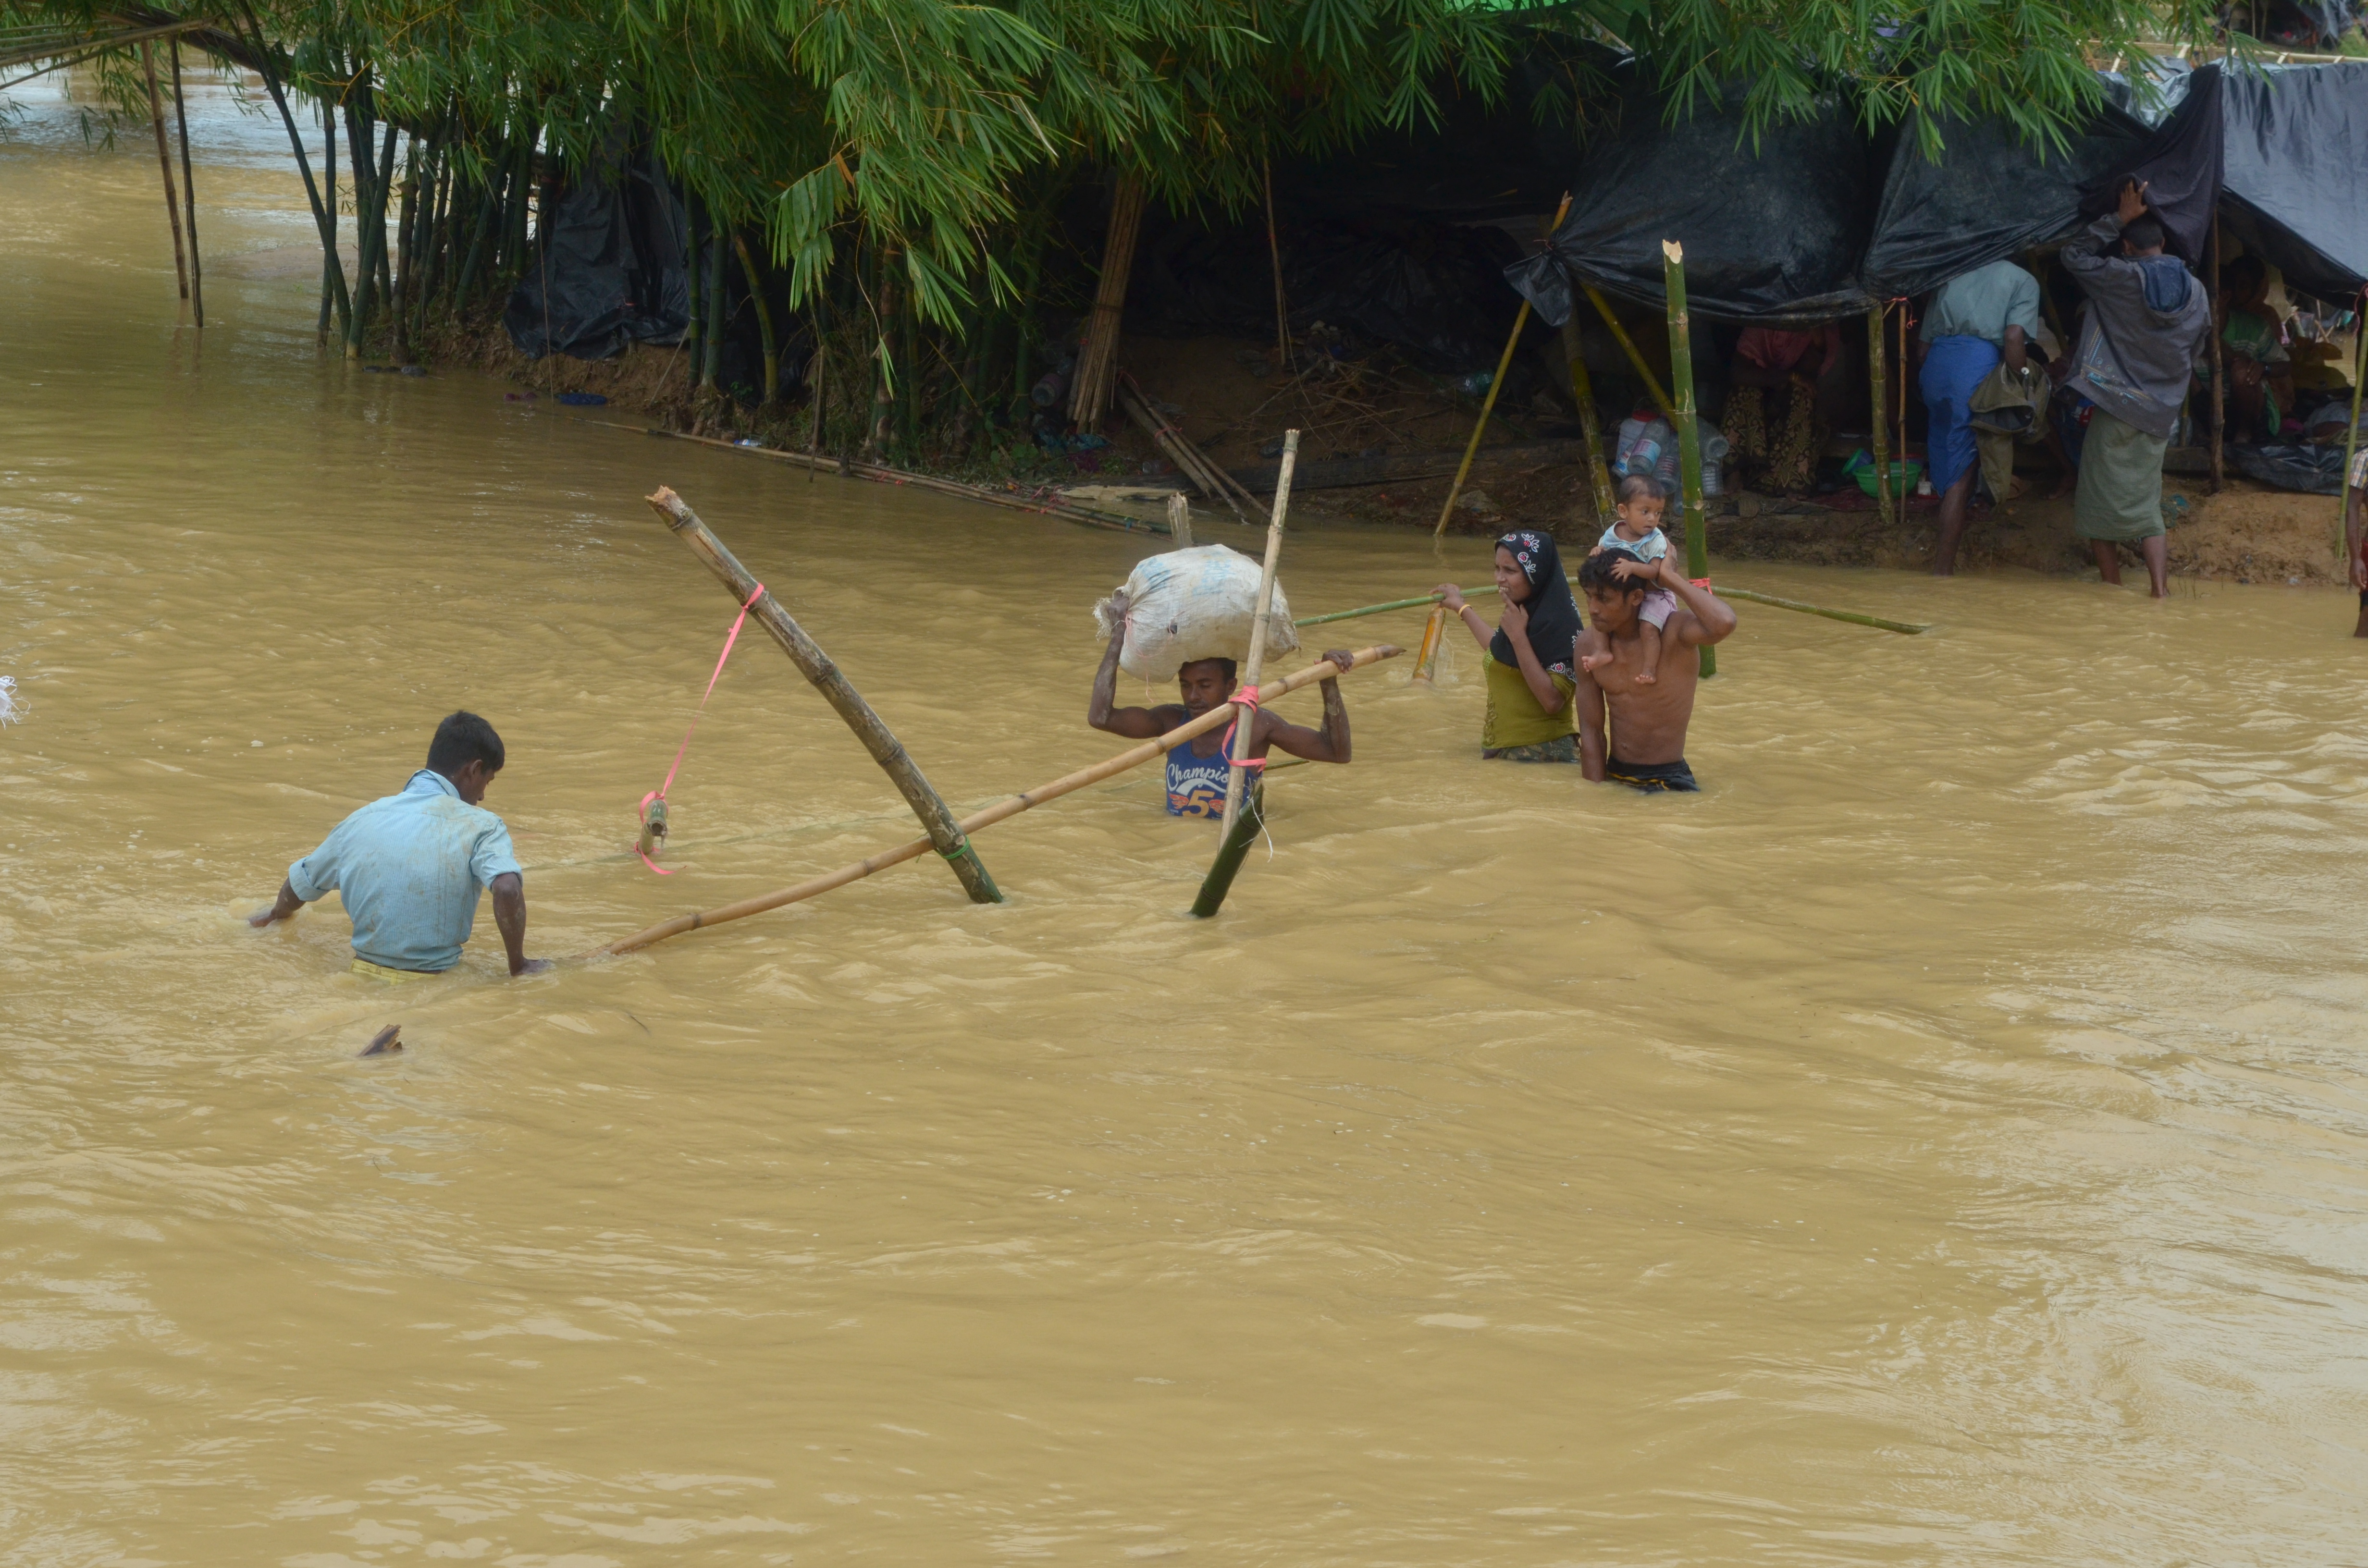 Rohingya refugees attempting to swim to the main road away from their tents which are surrounded by dirty flood water